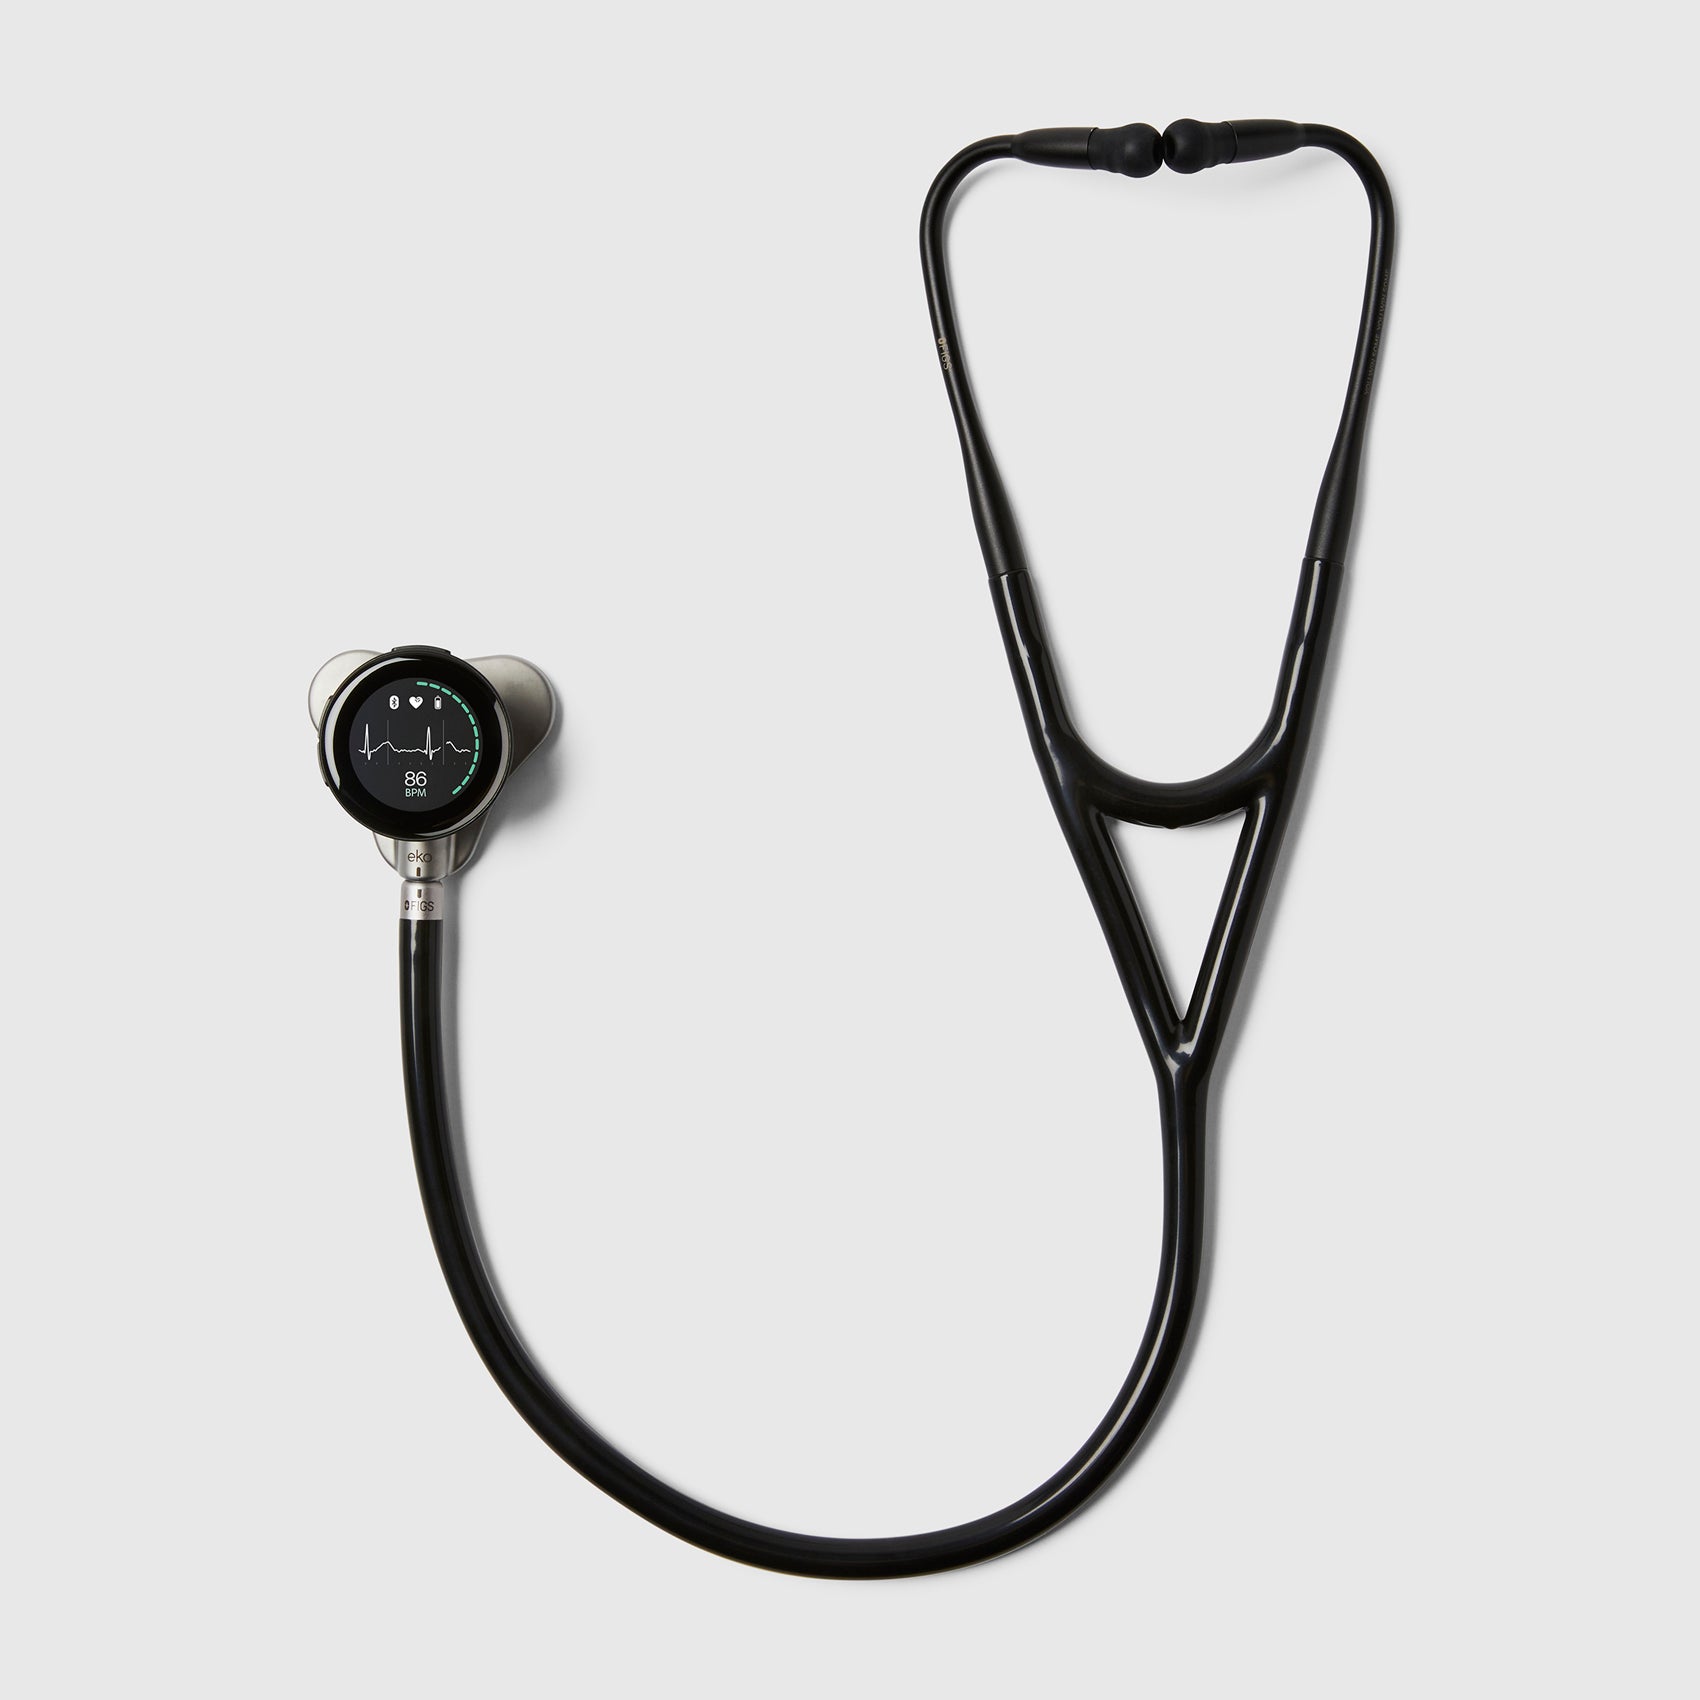 The Best Stethoscopes for Every Profession in 2023